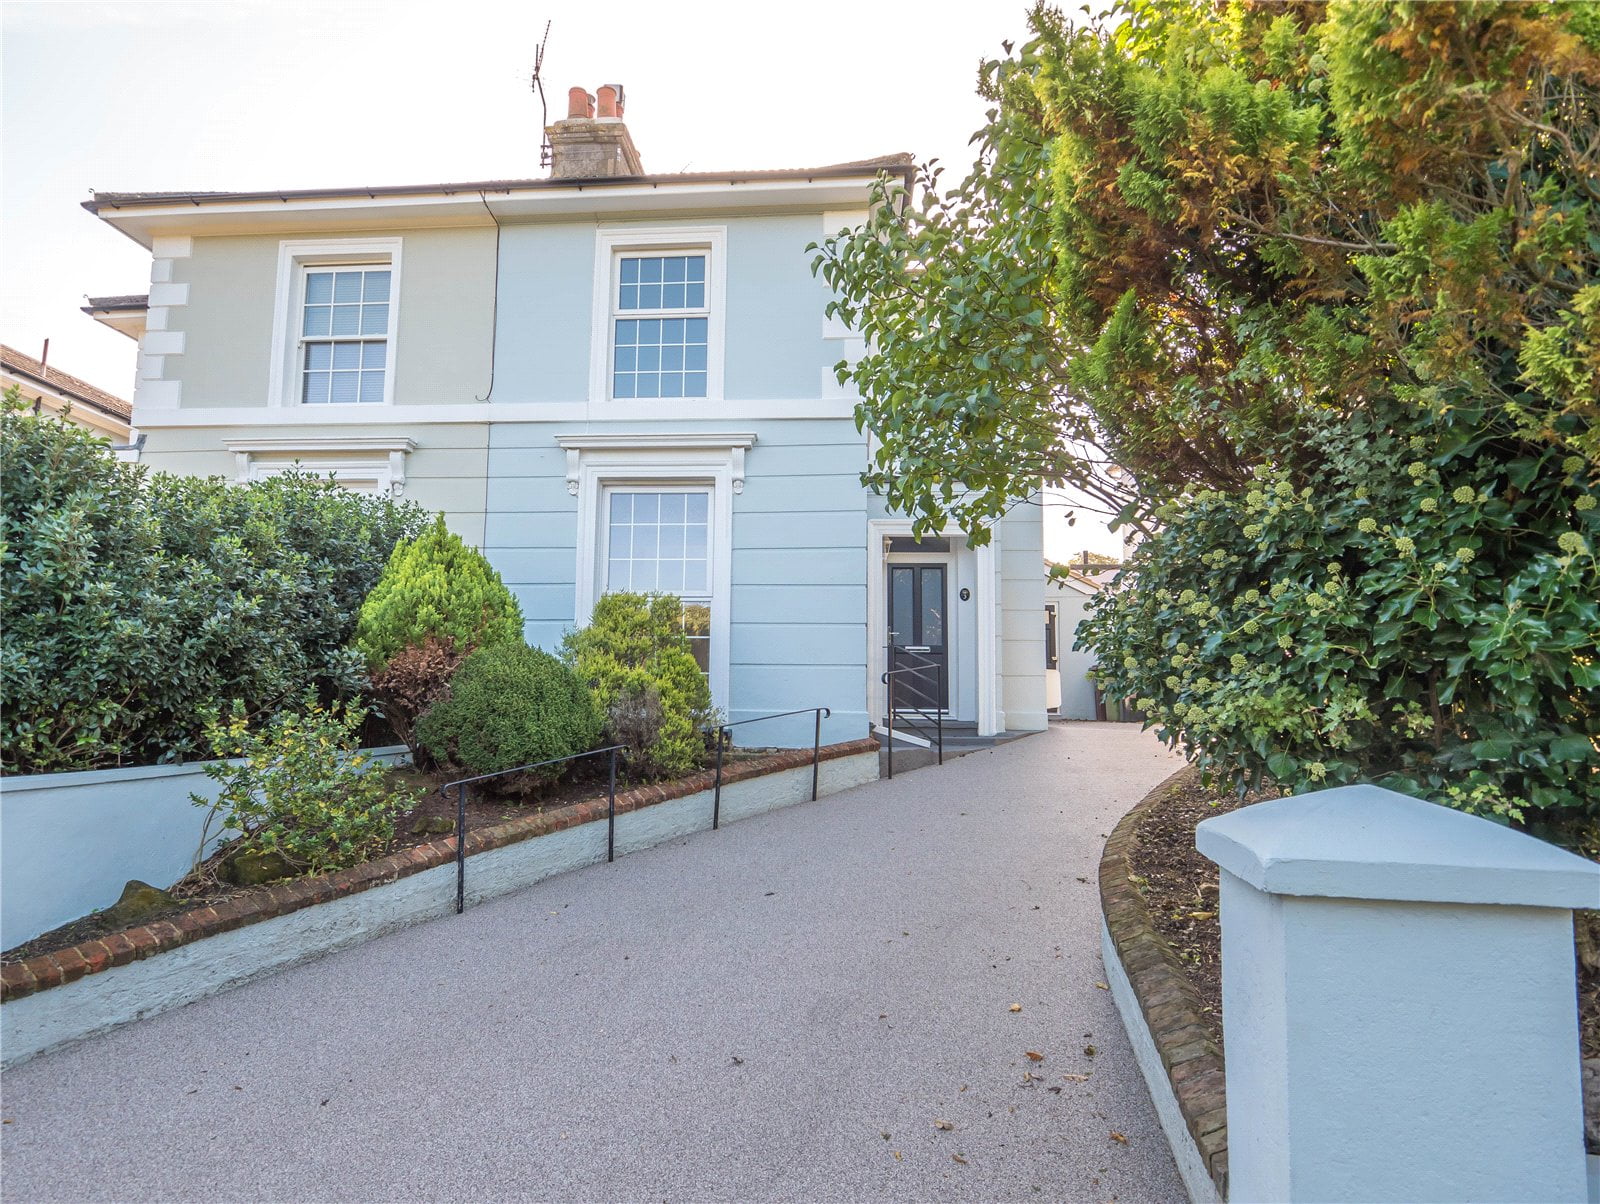 St. Mary's Villas, Battle, East Sussex,  | residential-sales